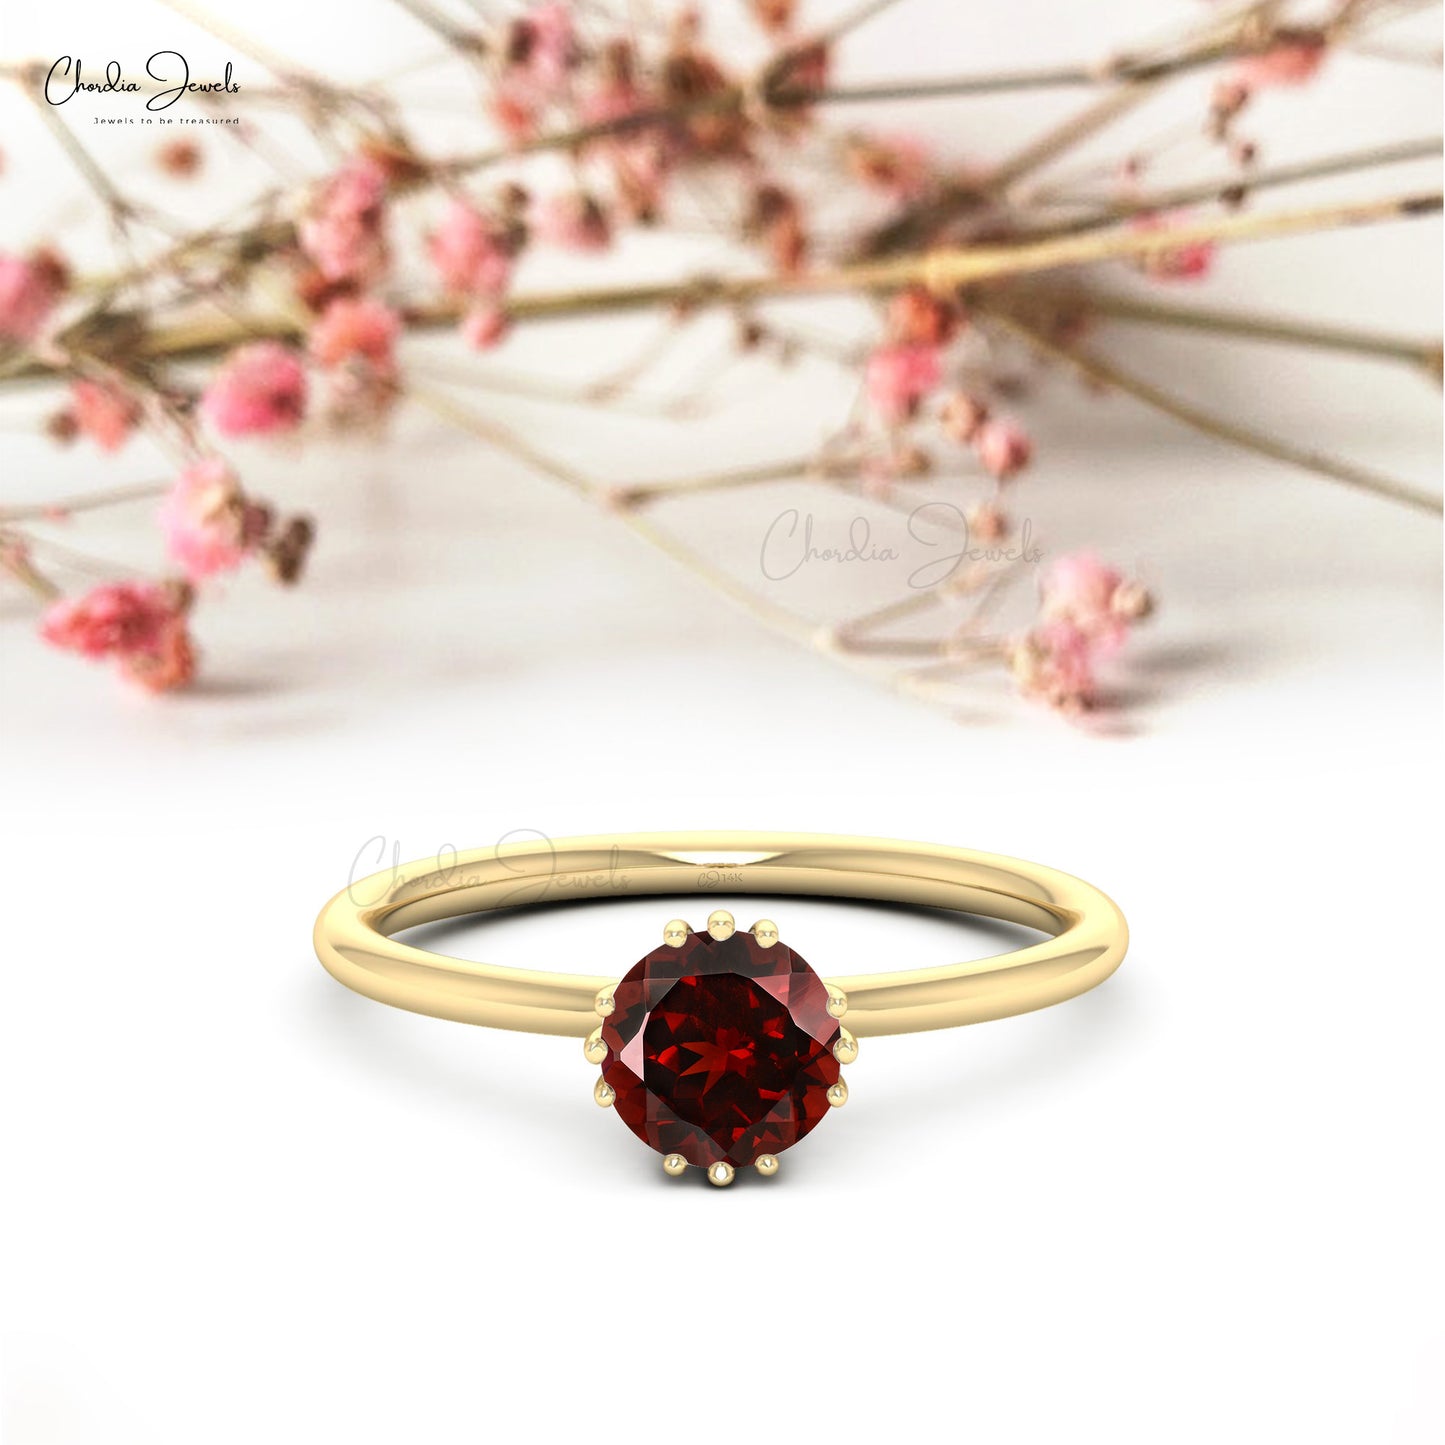 Dainty 14k Solid Gold Red Garnet Solitaire Wedding Ring